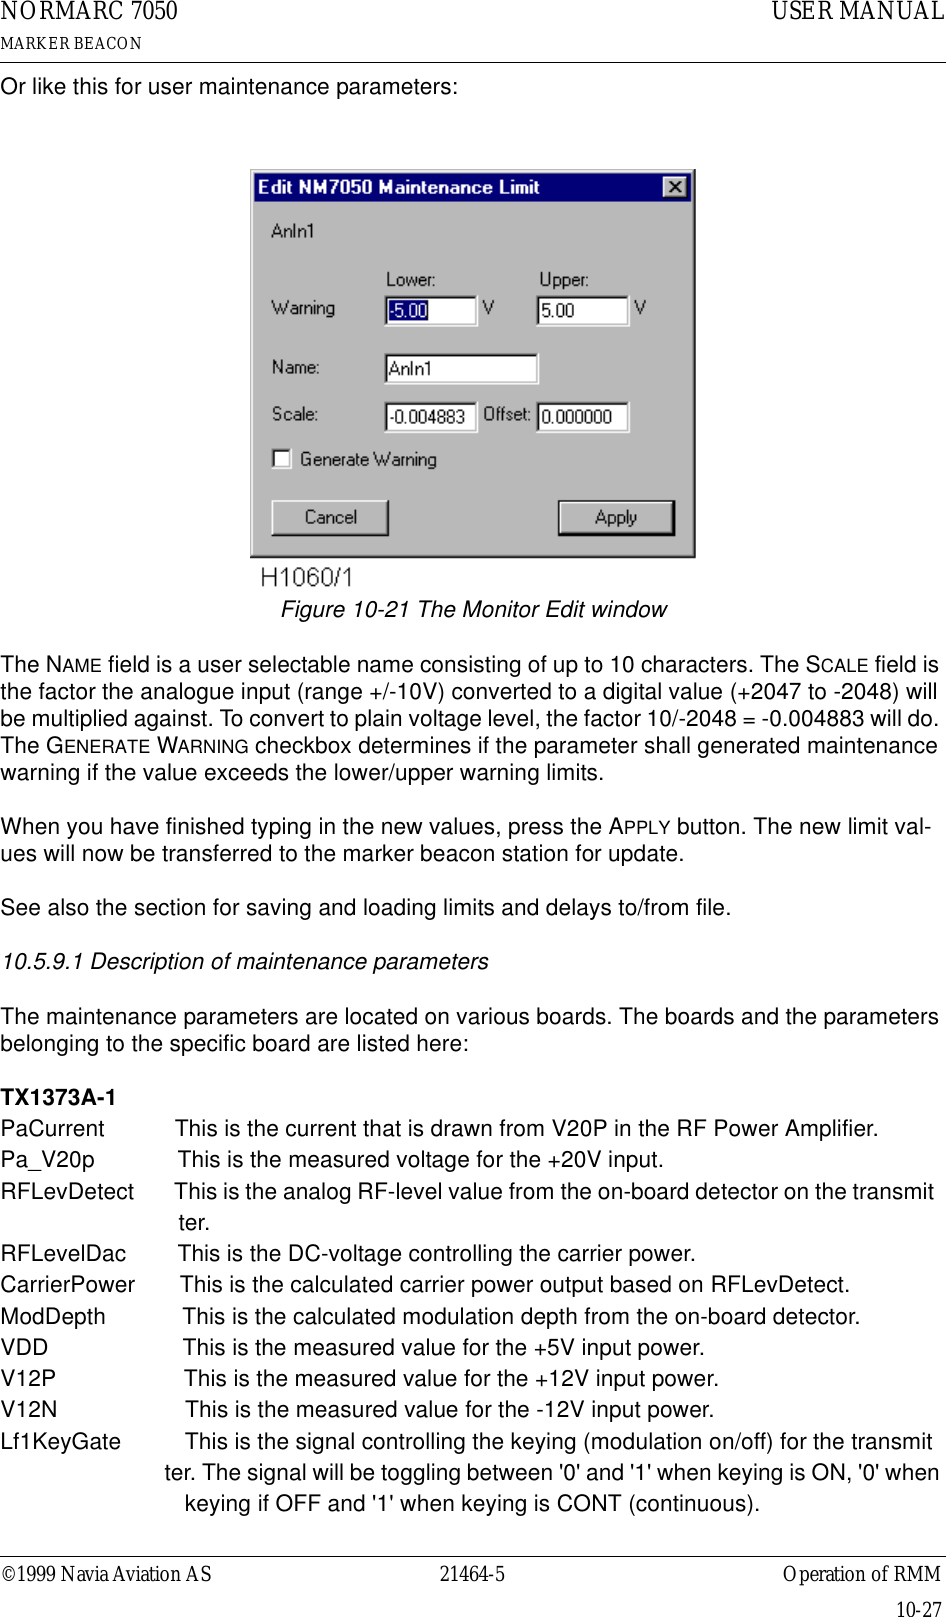 ©1999 Navia Aviation AS 21464-5 Operation of RMMUSER MANUALNORMARC 7050MARKER BEACON10-27Or like this for user maintenance parameters:Figure 10-21 The Monitor Edit windowThe NAME field is a user selectable name consisting of up to 10 characters. The SCALE field is the factor the analogue input (range +/-10V) converted to a digital value (+2047 to -2048) will be multiplied against. To convert to plain voltage level, the factor 10/-2048 = -0.004883 will do. The GENERATE WARNING checkbox determines if the parameter shall generated maintenance warning if the value exceeds the lower/upper warning limits.When you have finished typing in the new values, press the APPLY button. The new limit val-ues will now be transferred to the marker beacon station for update.See also the section for saving and loading limits and delays to/from file.10.5.9.1 Description of maintenance parametersThe maintenance parameters are located on various boards. The boards and the parameters belonging to the specific board are listed here:TX1373A-1PaCurrent           This is the current that is drawn from V20P in the RF Power Amplifier.Pa_V20p             This is the measured voltage for the +20V input.RFLevDetect       This is the analog RF-level value from the on-board detector on the transmit                              ter.RFLevelDac        This is the DC-voltage controlling the carrier power.CarrierPower       This is the calculated carrier power output based on RFLevDetect.ModDepth            This is the calculated modulation depth from the on-board detector.VDD                     This is the measured value for the +5V input power.V12P                    This is the measured value for the +12V input power.V12N                    This is the measured value for the -12V input power.Lf1KeyGate          This is the signal controlling the keying (modulation on/off) for the transmit                             ter. The signal will be toggling between &apos;0&apos; and &apos;1&apos; when keying is ON, &apos;0&apos; when                              keying if OFF and &apos;1&apos; when keying is CONT (continuous).